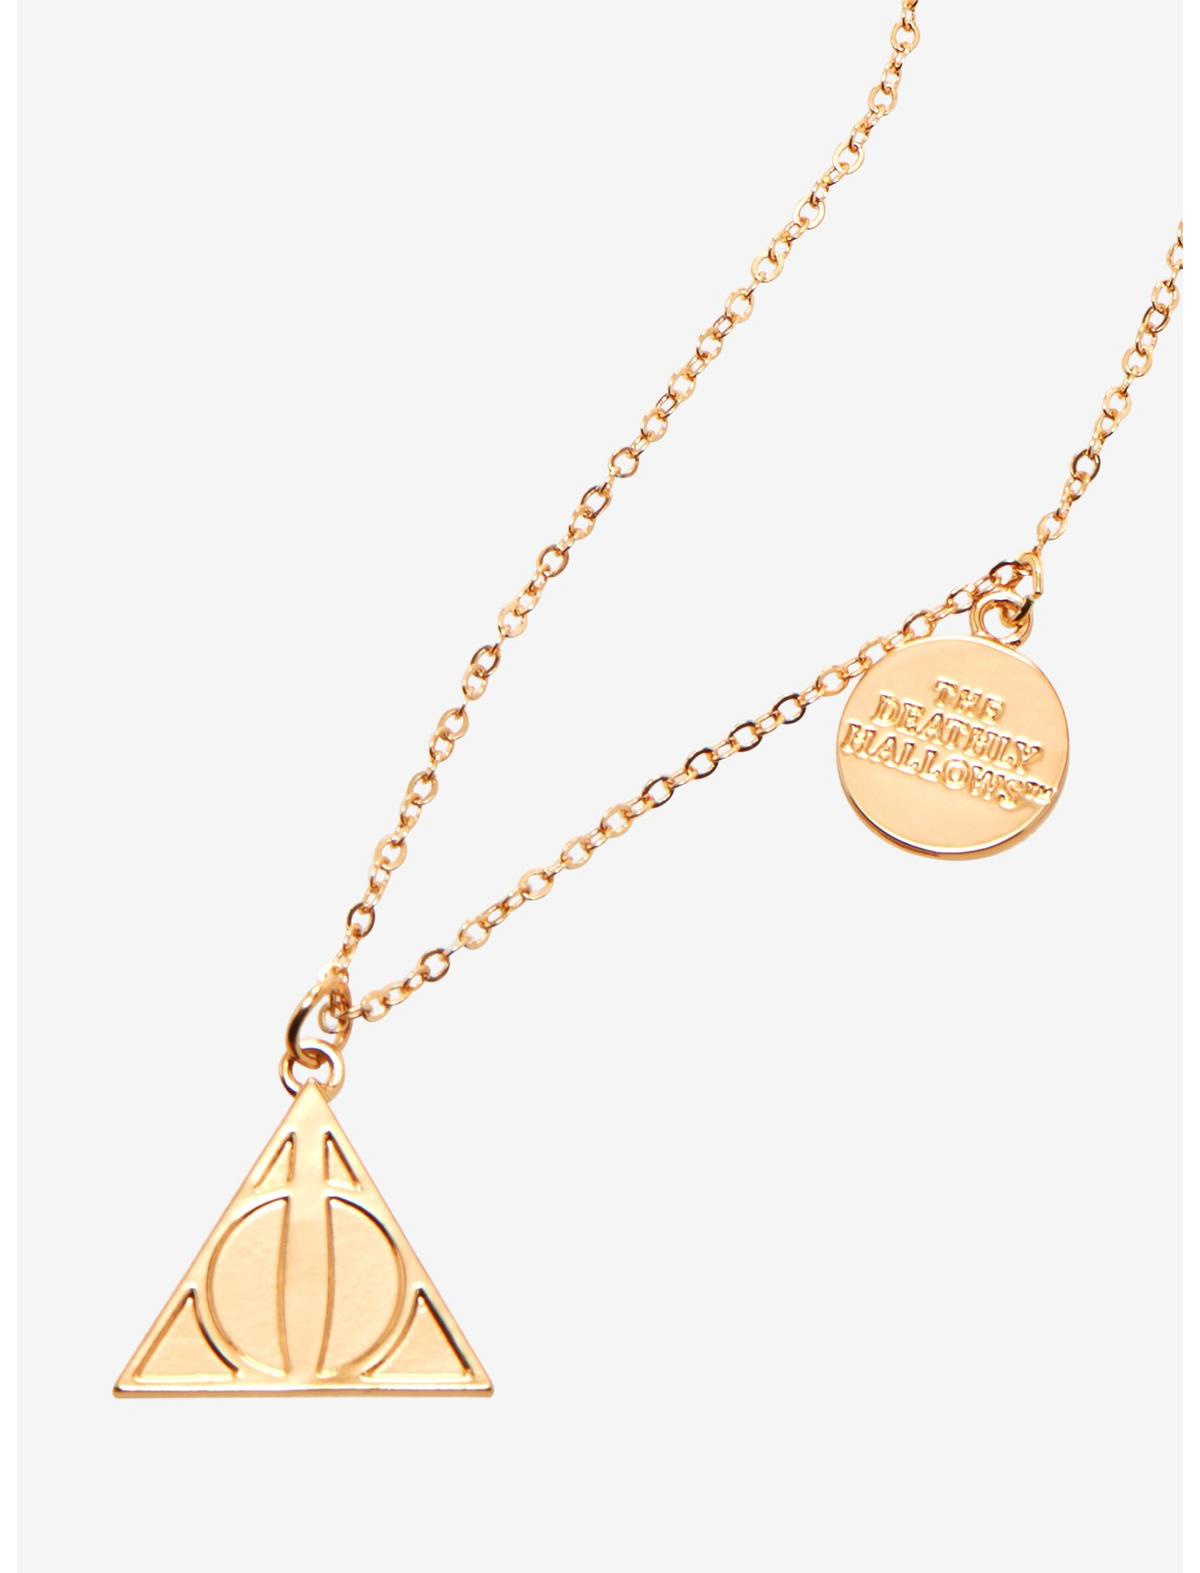 Amazon.com: Official Harry Potter Deathly Hallows Necklace by The Carat  Shop : Harry Potter: Clothing, Shoes & Jewelry